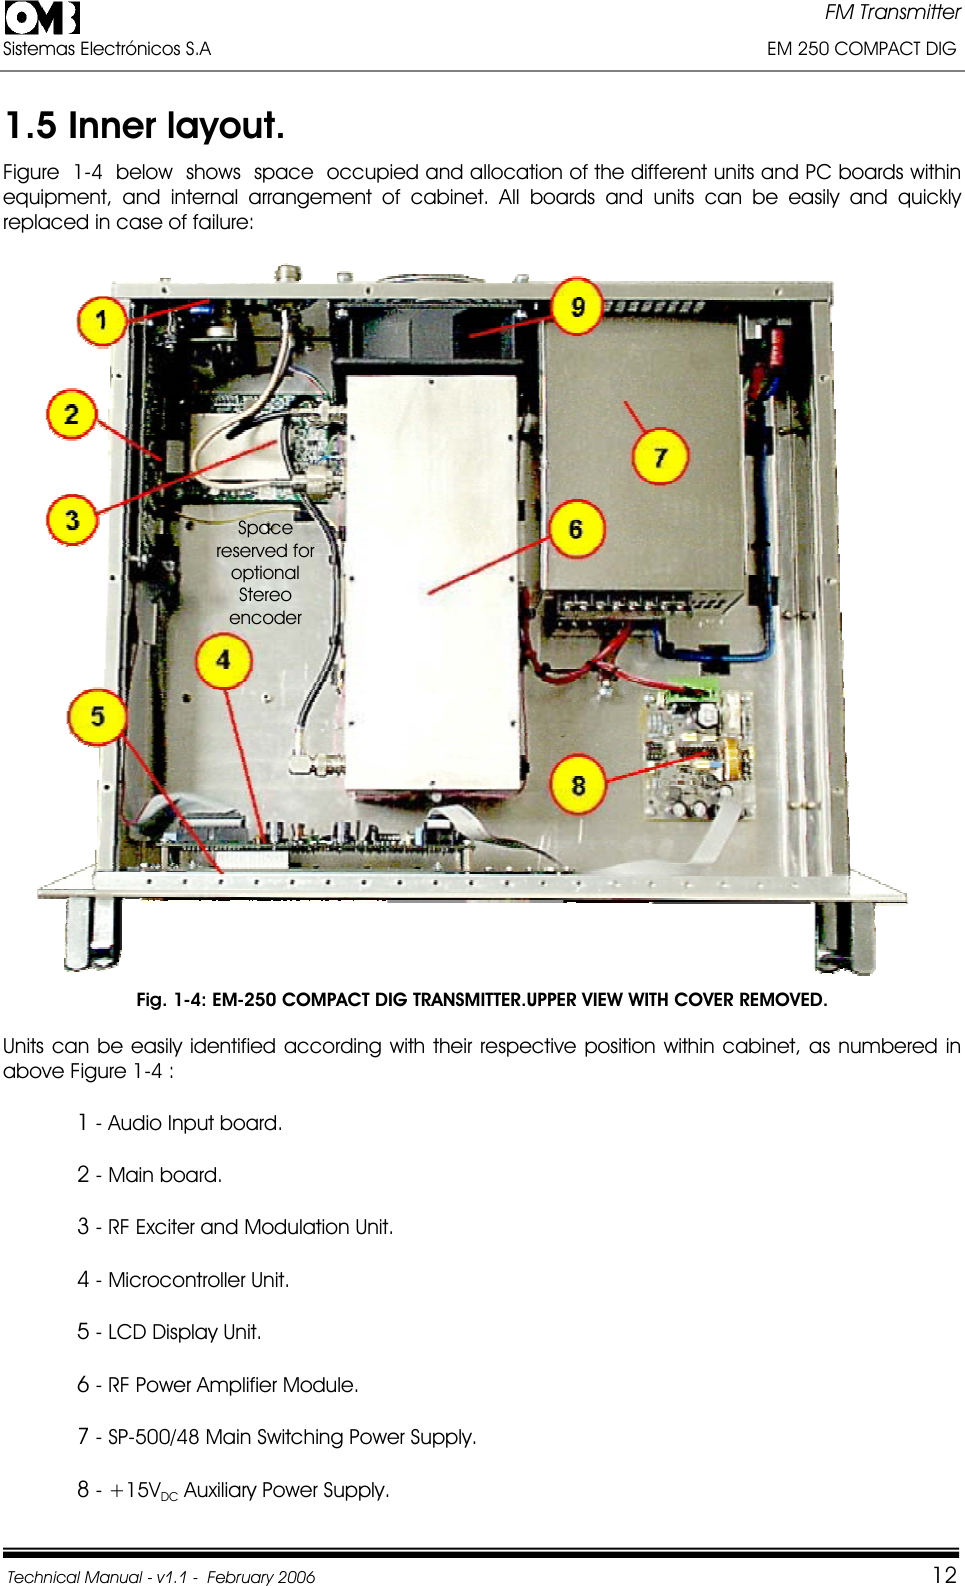 FM Transmitter Sistemas Electrónicos S.A                                                                                                         EM 250 COMPACT DIG  Technical Manual - v1.1 -  February 2006                                    121.5 Inner layout.Figure  1-4  below  shows  space  occupied and allocation of the different units and PC boards within equipment, and internal arrangement of cabinet. All boards and units can be easily and quickly replaced in case of failure: Fig. 1-4: EM-250 COMPACT DIG TRANSMITTER.UPPER VIEW WITH COVER REMOVED. Units can be easily identified according with their respective position within cabinet, as numbered in above Figure 1-4 : 1 - Audio Input board. 2 - Main board. 3 - RF Exciter and Modulation Unit. 4 - Microcontroller Unit.5 - LCD Display Unit. 6 - RF Power Amplifier Module.  7 - SP-500/48 Main Switching Power Supply. 8 - +15VDC Auxiliary Power Supply. Spacereserved for optionalStereoencoder